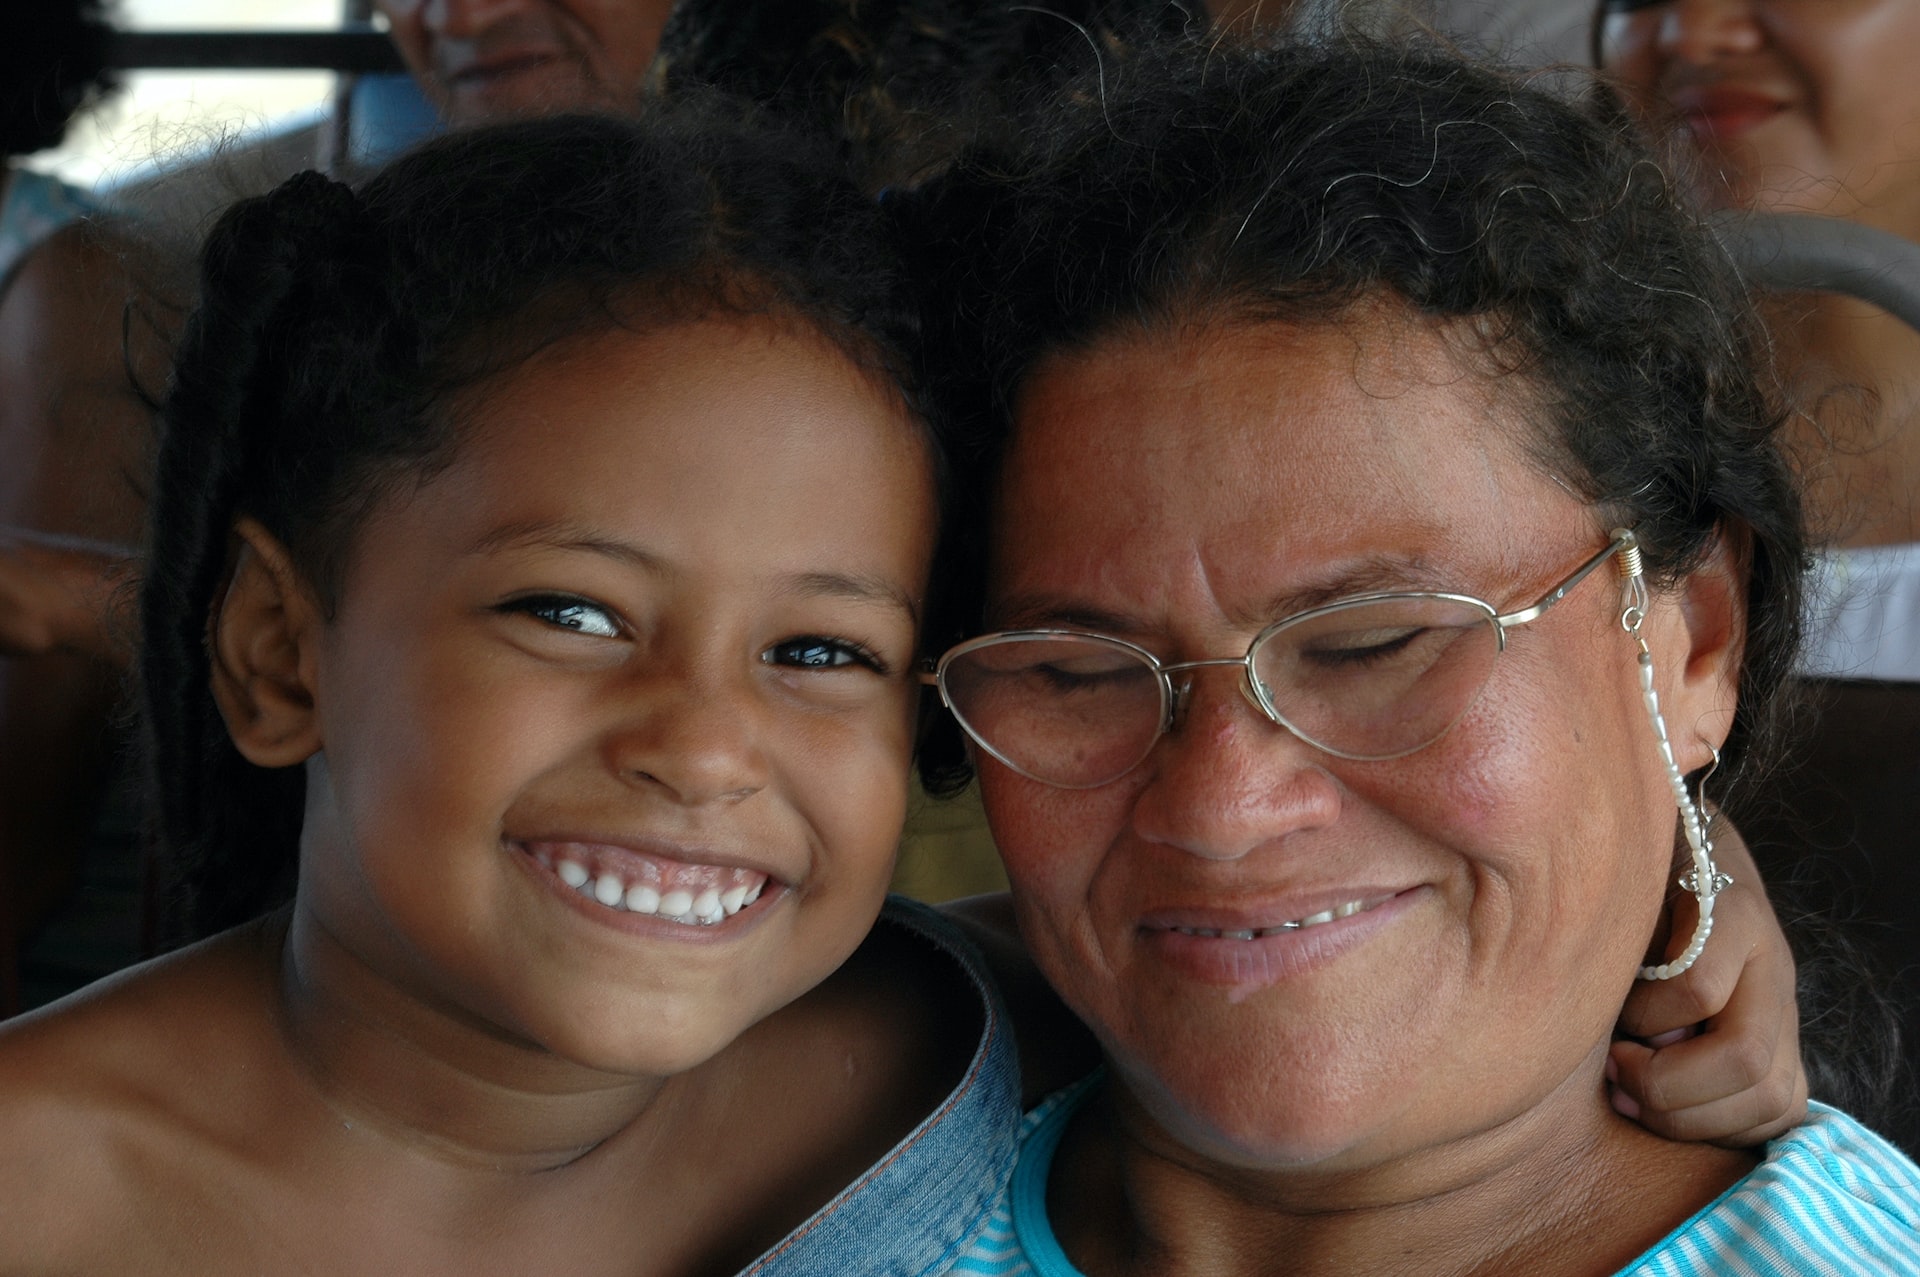 smiling faces in brazil makes traveling to brazil even more exciting
